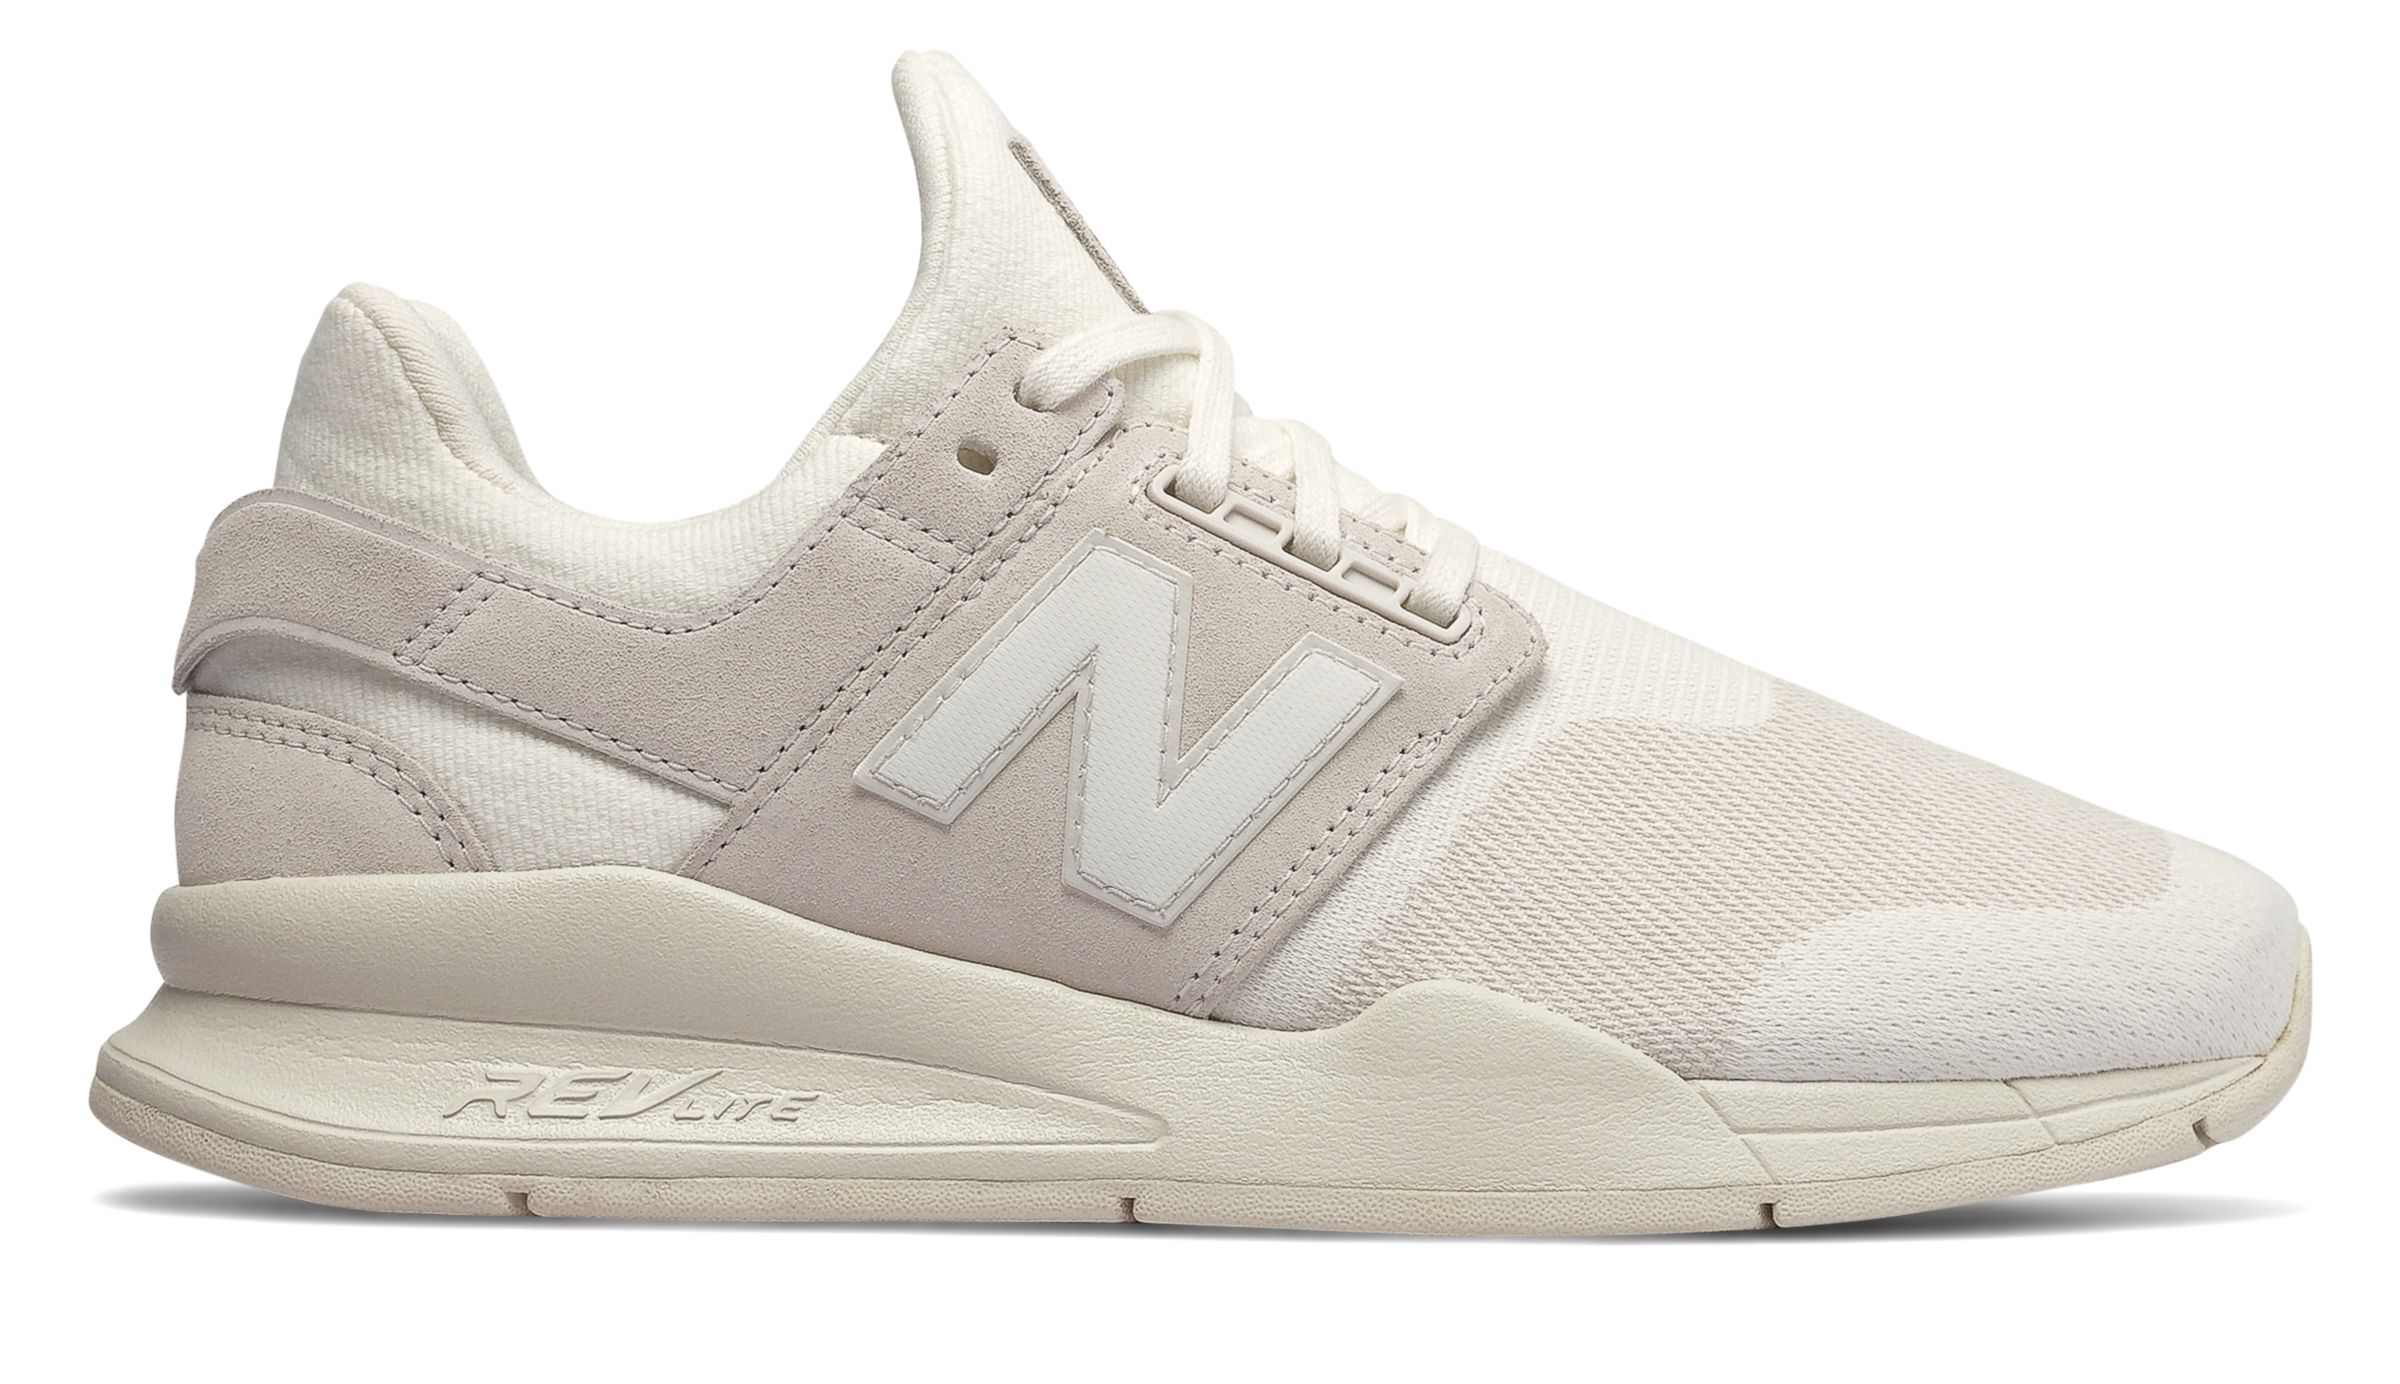 New Balance WS247-KS on Sale - Discounts Up to 59% Off on WS247HPB at Joe's  New Balance Outlet